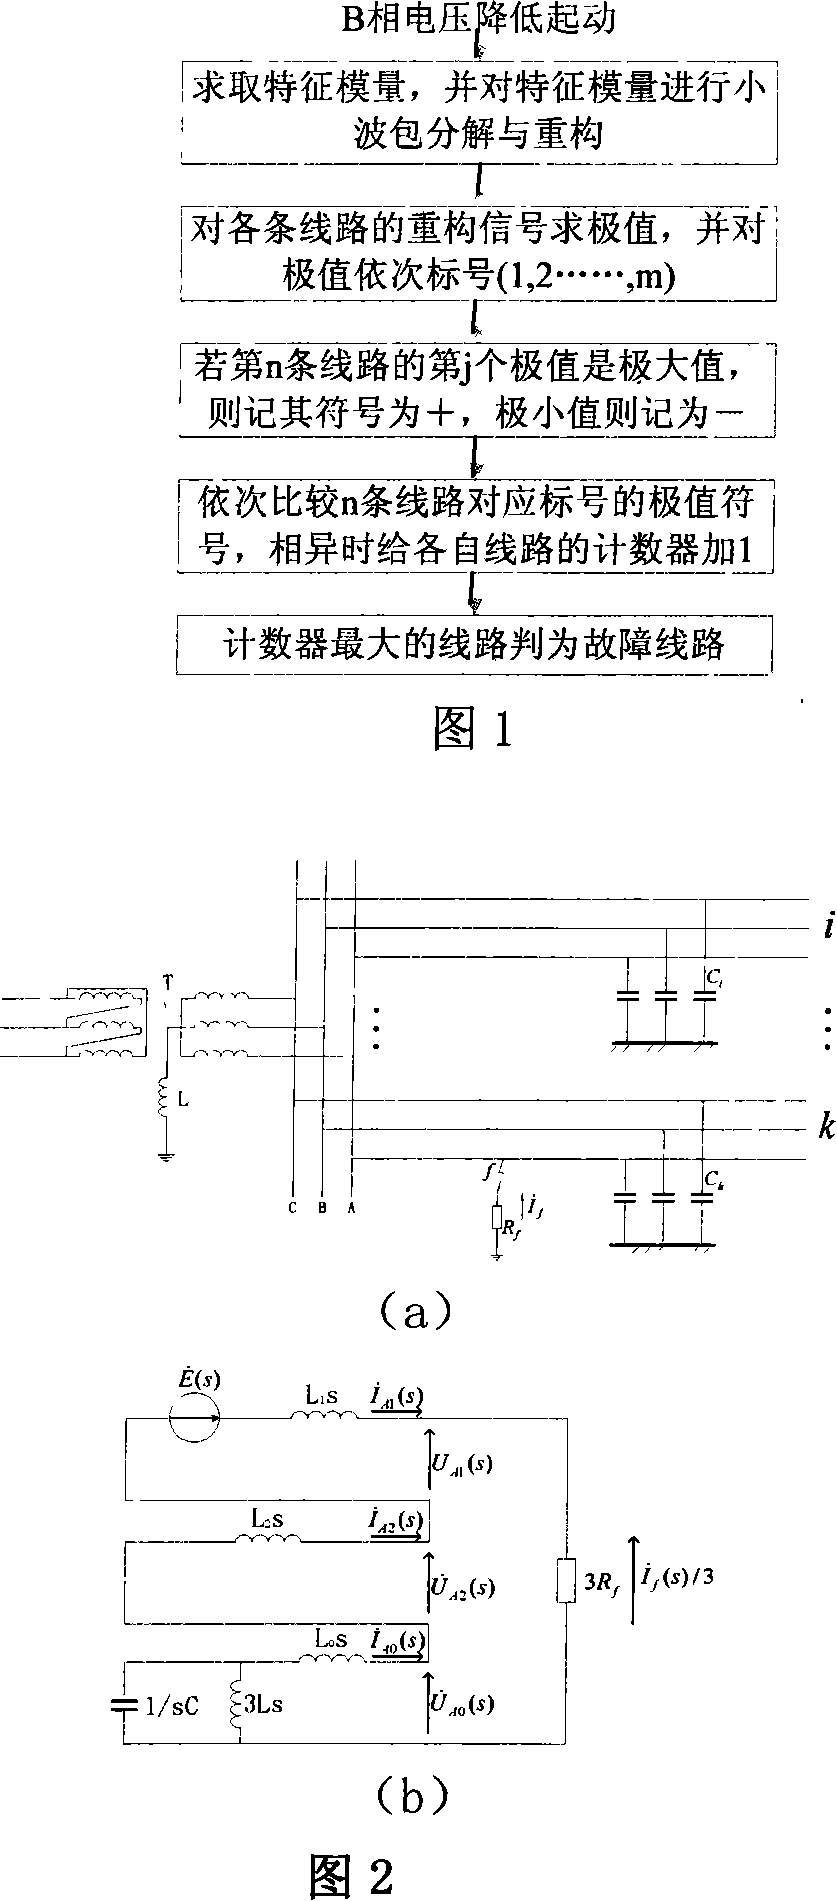 Route selection method for single-phase ground fault of two-phase TA power distribution network